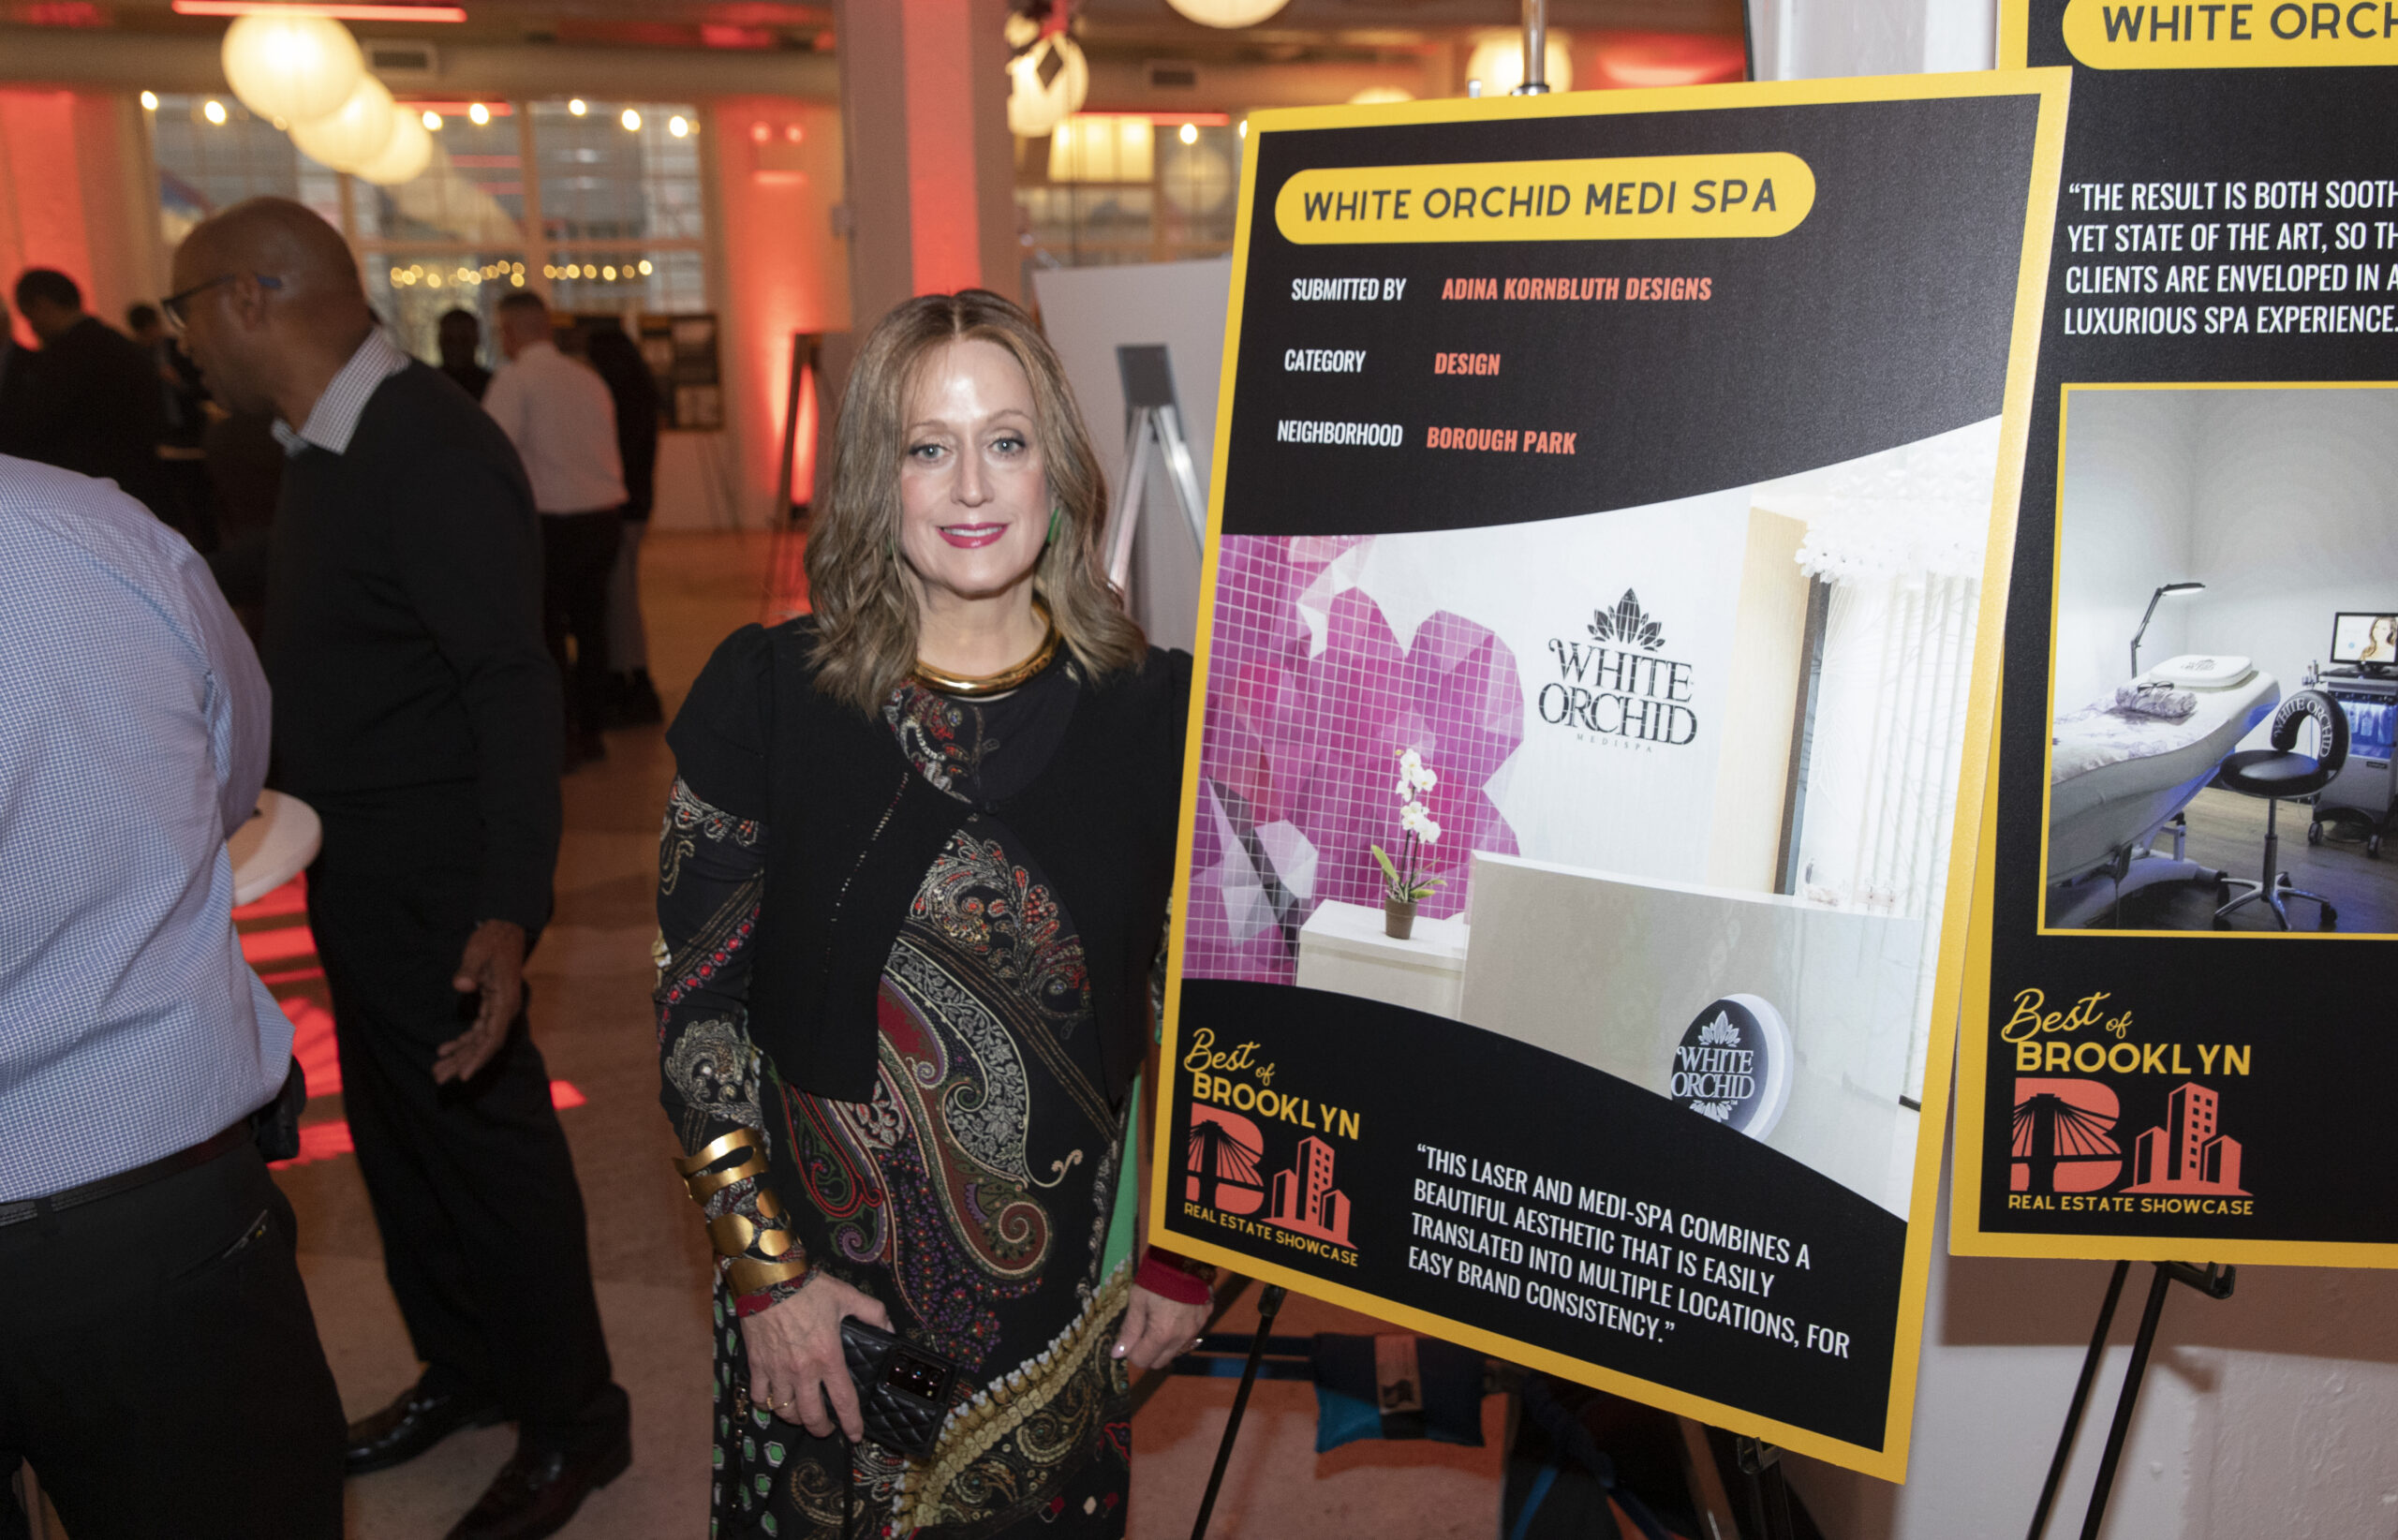 Adina Kornbluth next to her Project at Best of Brooklyn Real Estate Showcase.